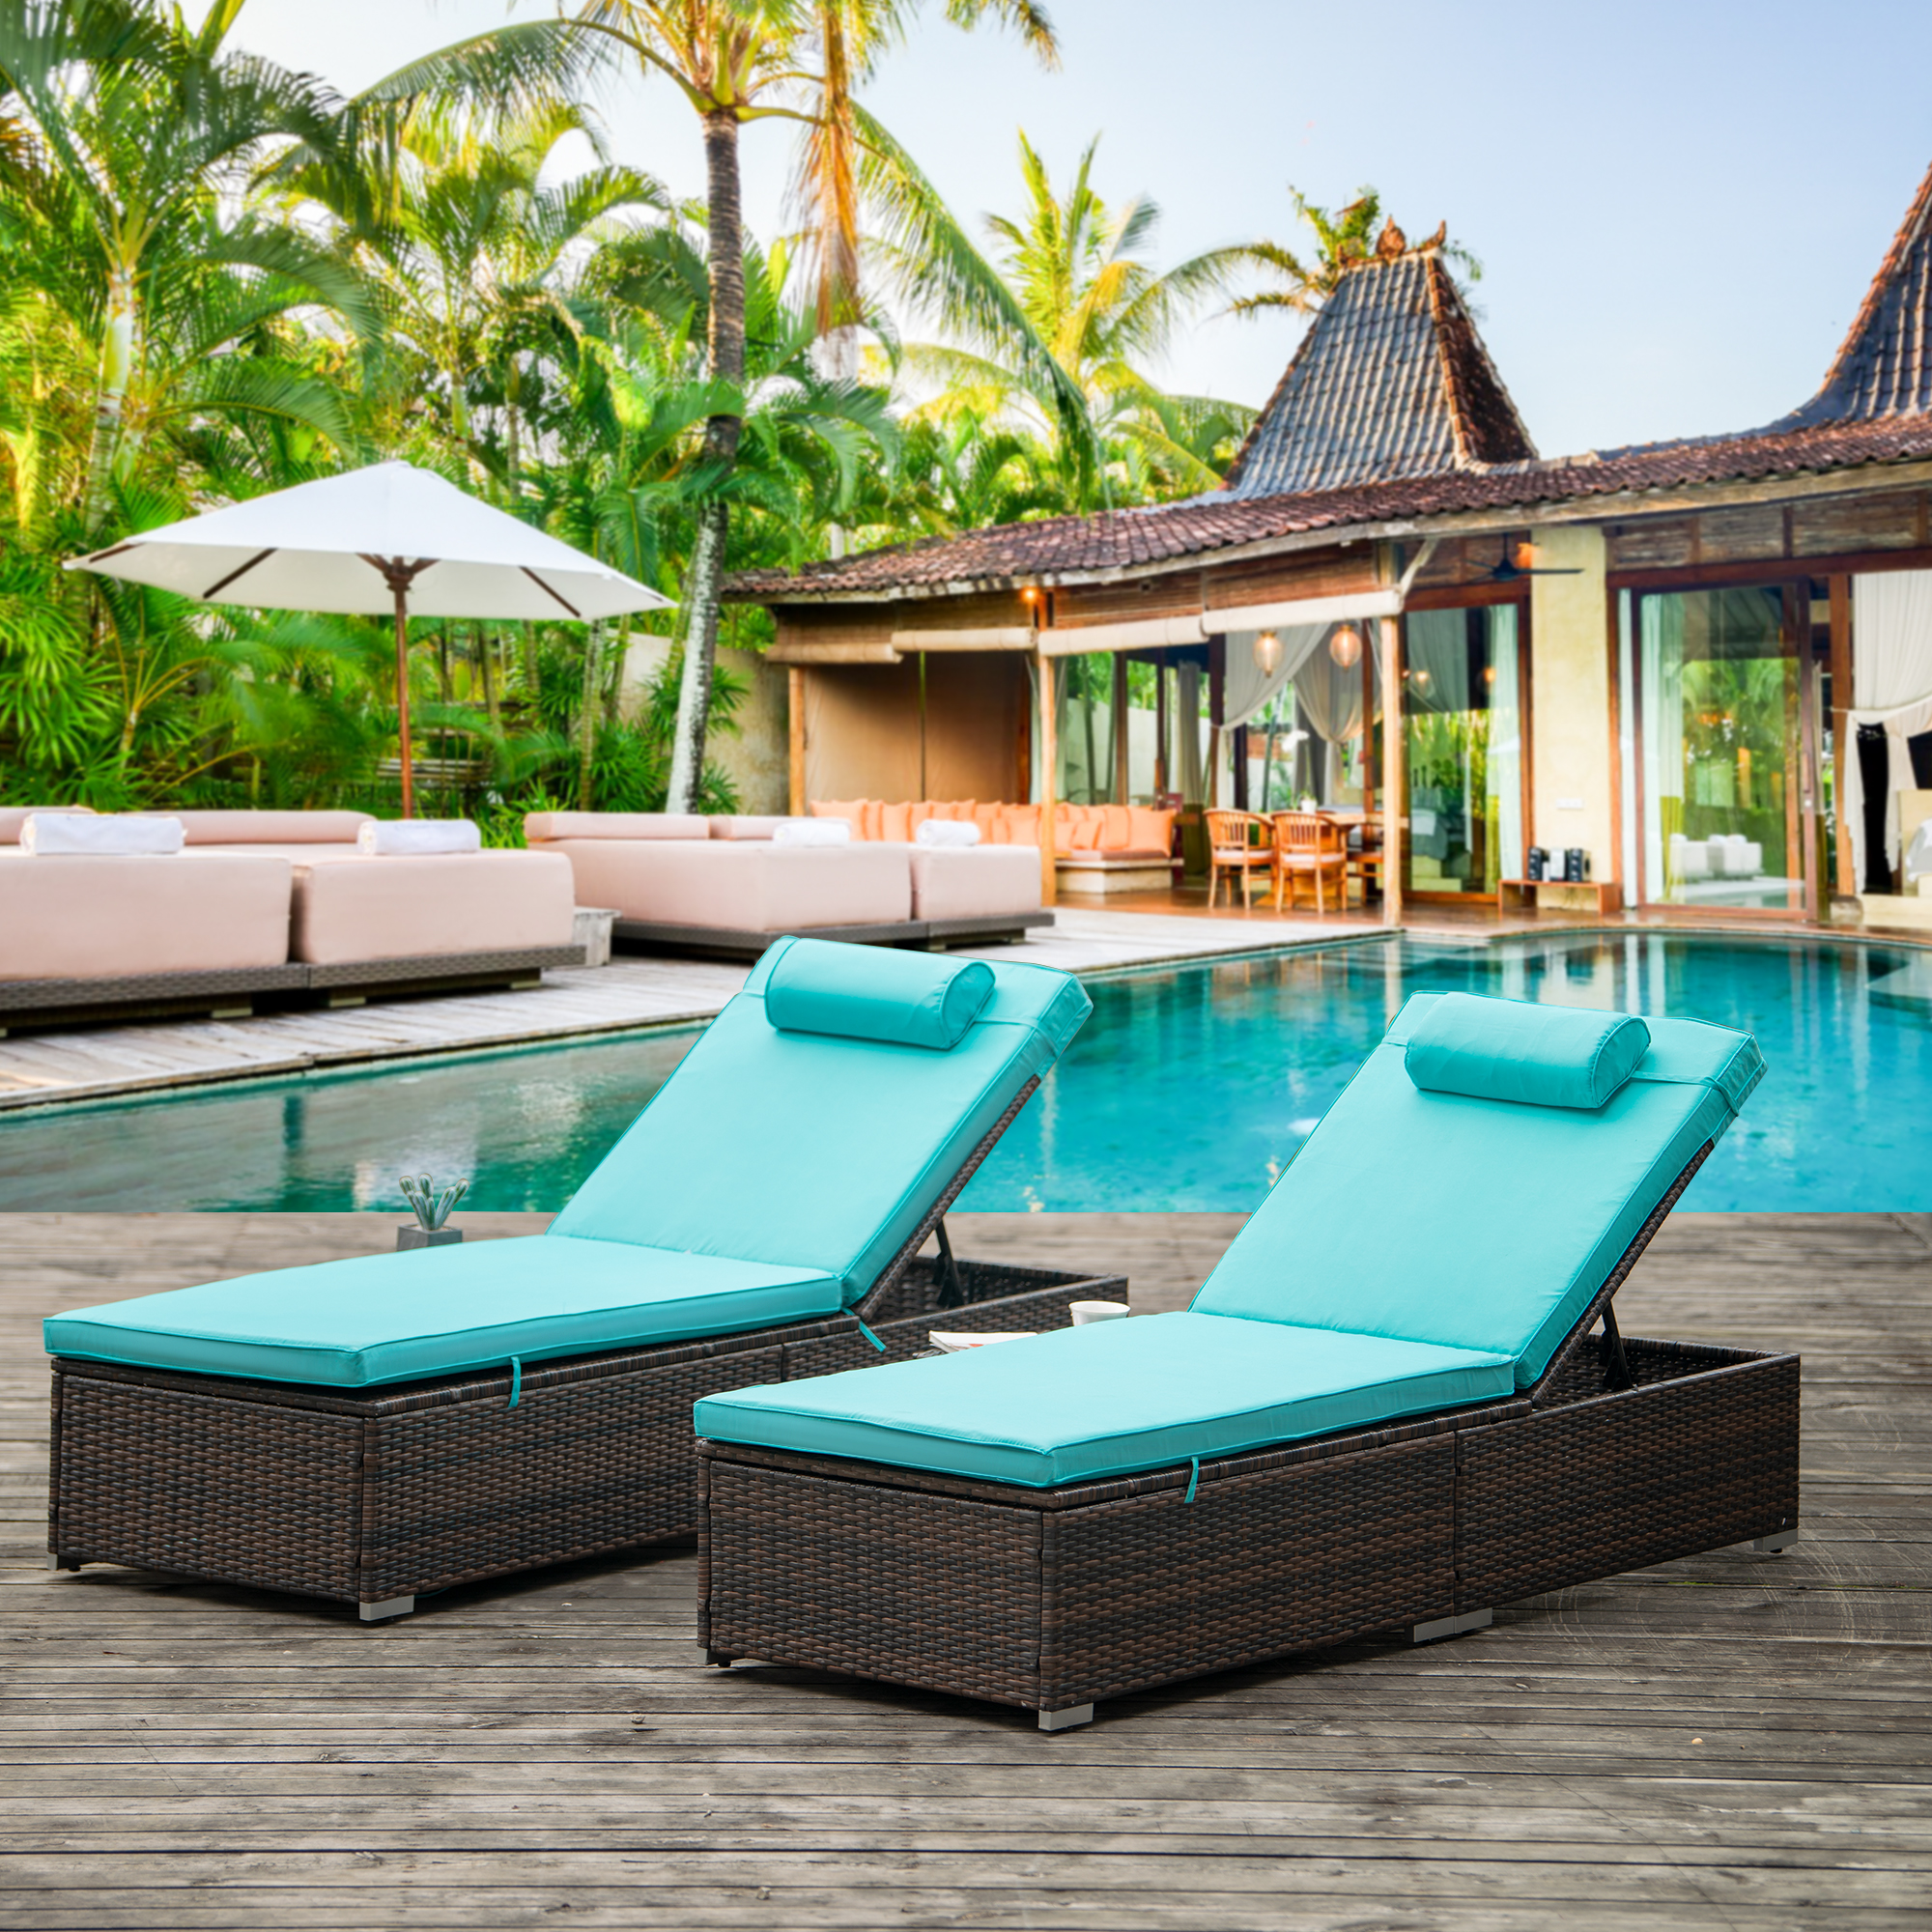 Outdoor PE Wicker Chaise Lounge Set, 2 Piece Garden Adjustable Chaise Lounge, Patio Rattan Reclining Chair Furniture Set, Beach Pool Adjustable Backrest Recliners with Blue Cushions - image 3 of 9